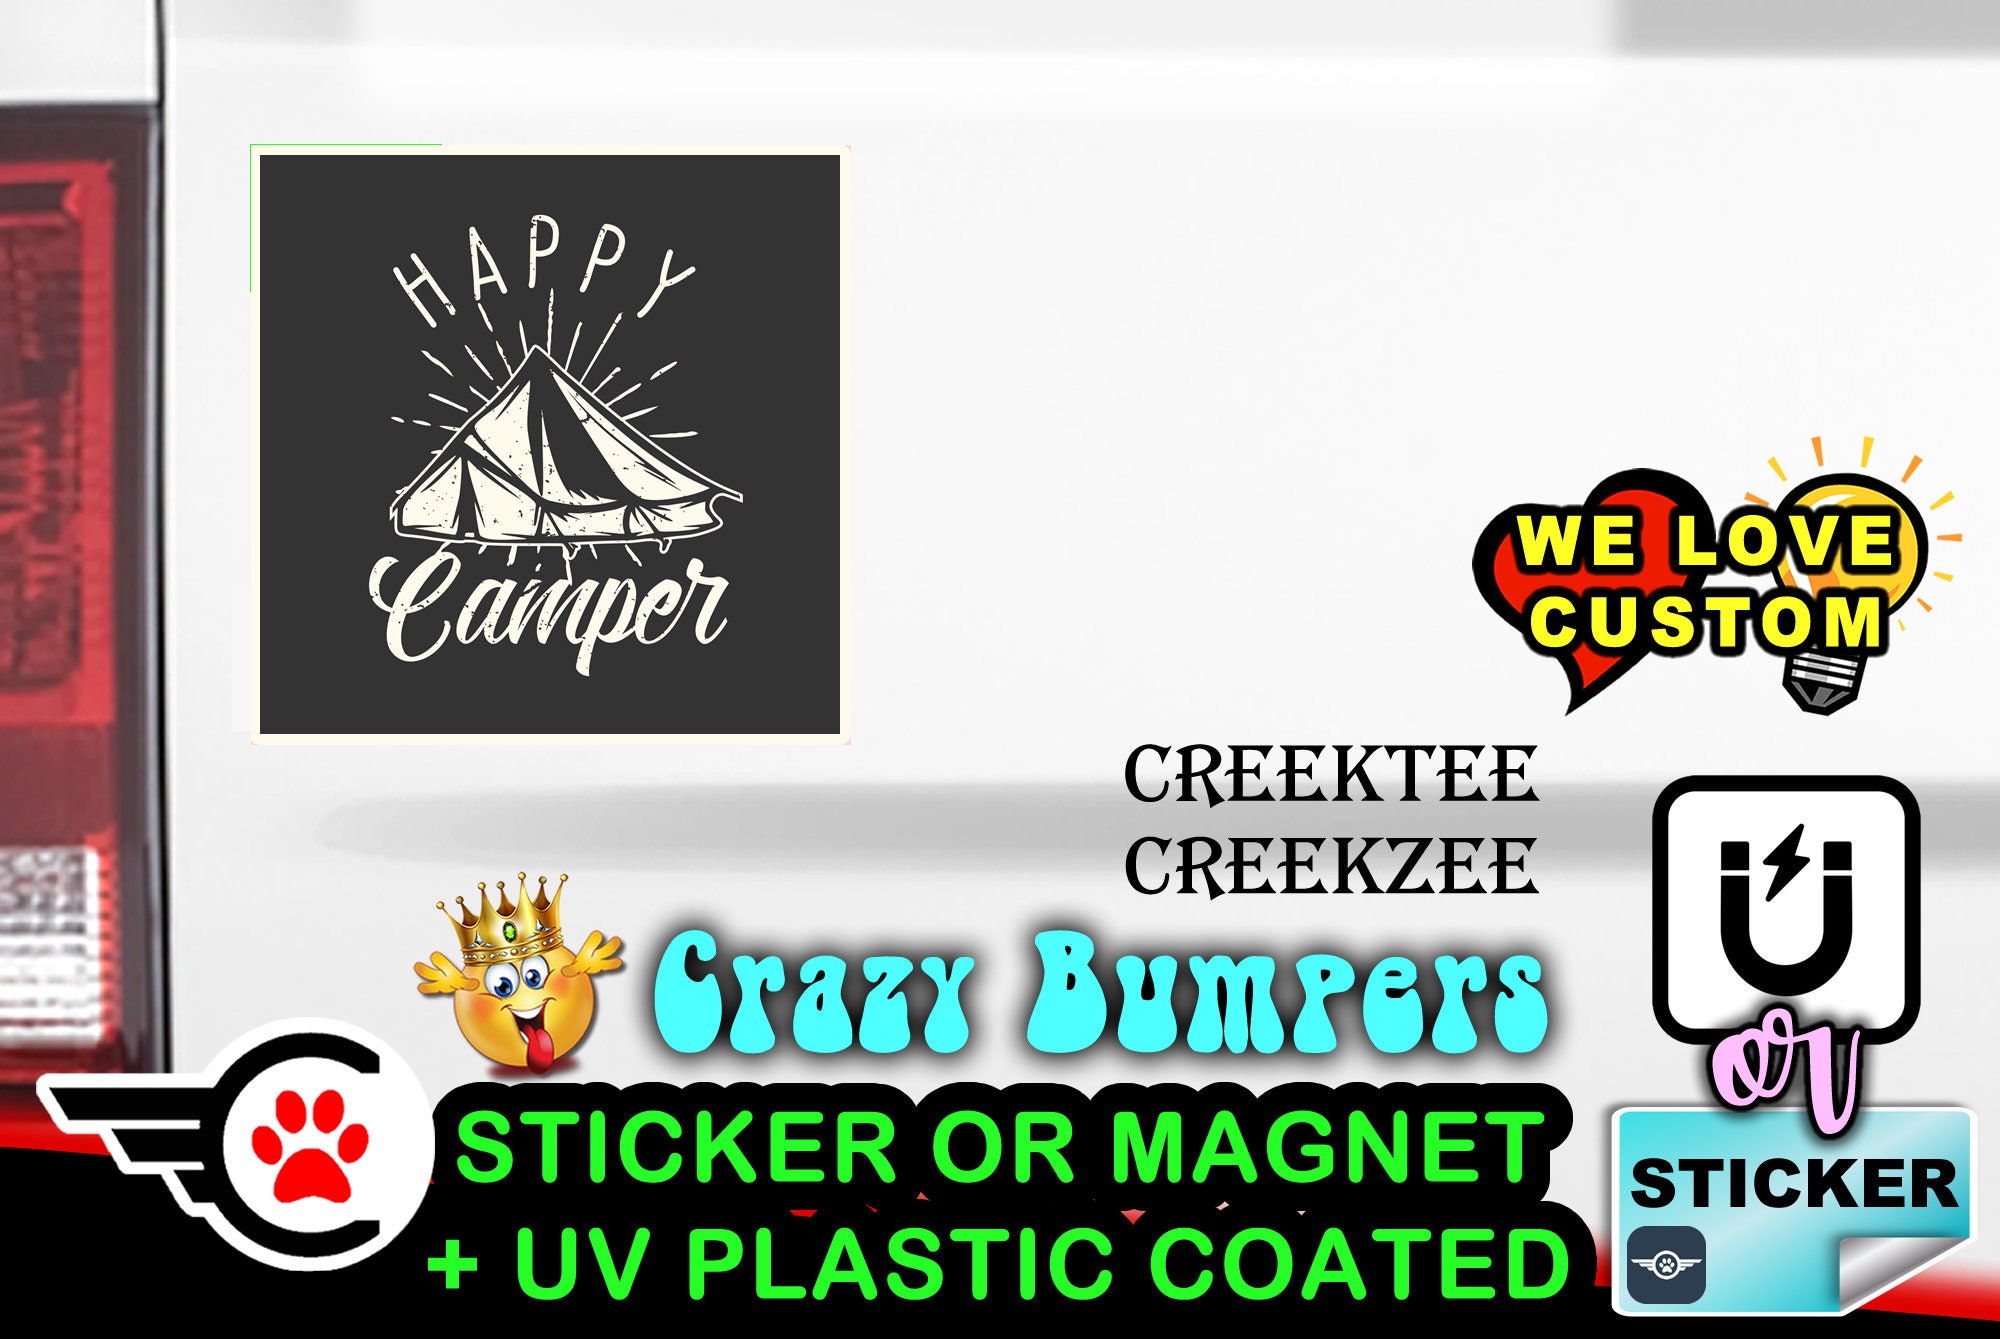 Happy Camper Bumper Sticker or Magnet in various sizes Hiqh Quality UV Laminate Coating 2